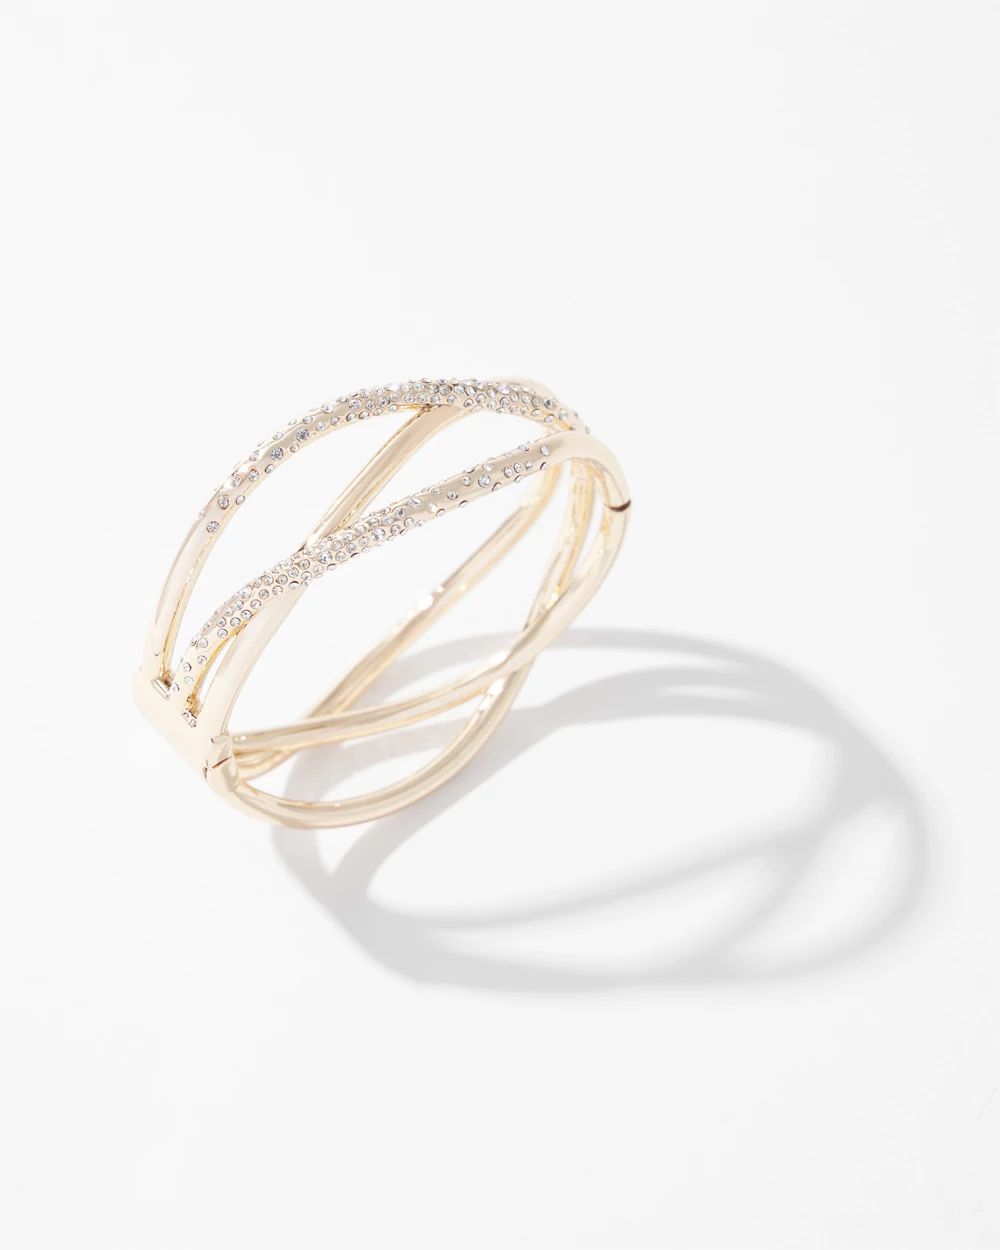 Gold Dusted Pave Cuff Bracelet click to view larger image.